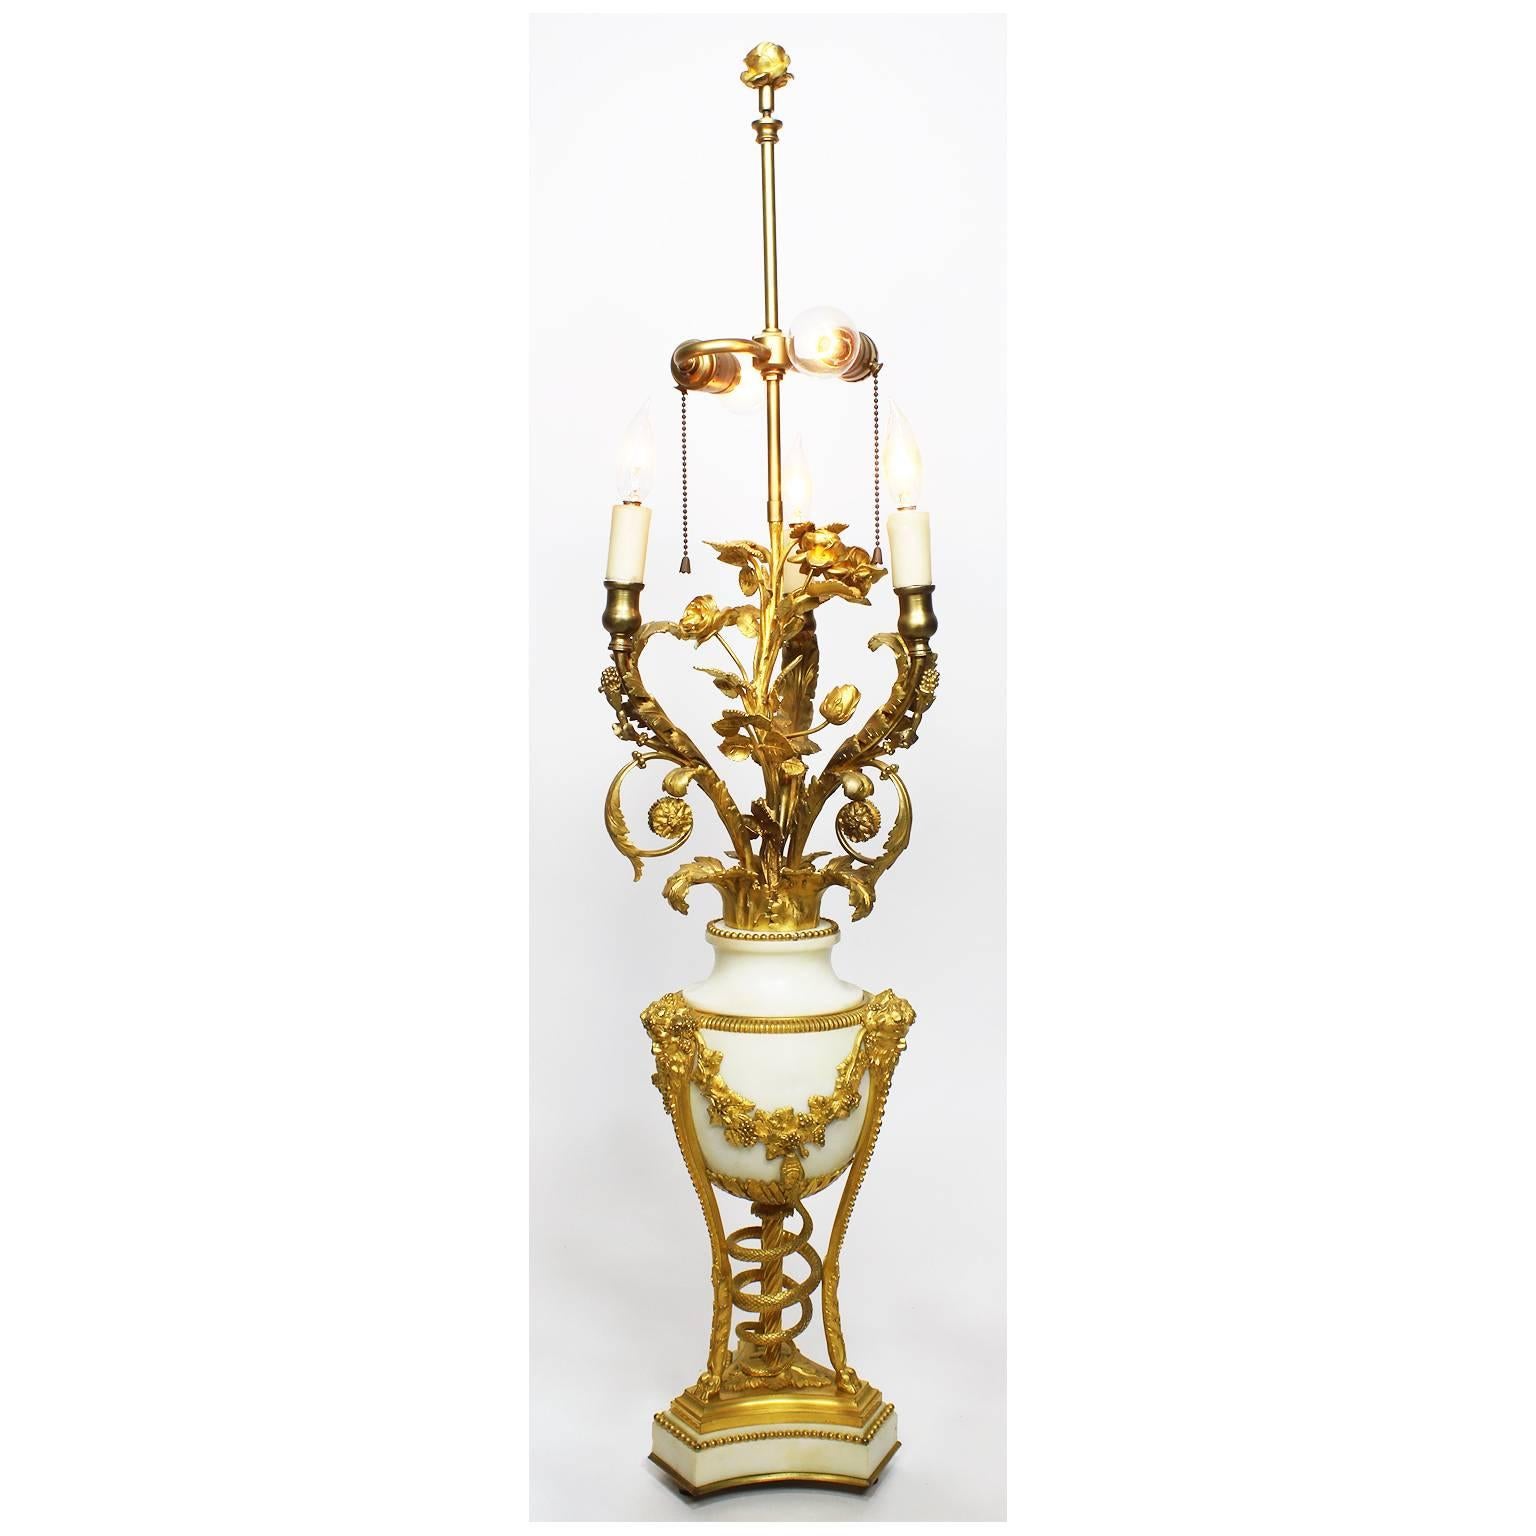 Pair of French 19th Century Louis XVI Style Ormolu & Marble Candelabra Beurdeley For Sale 1